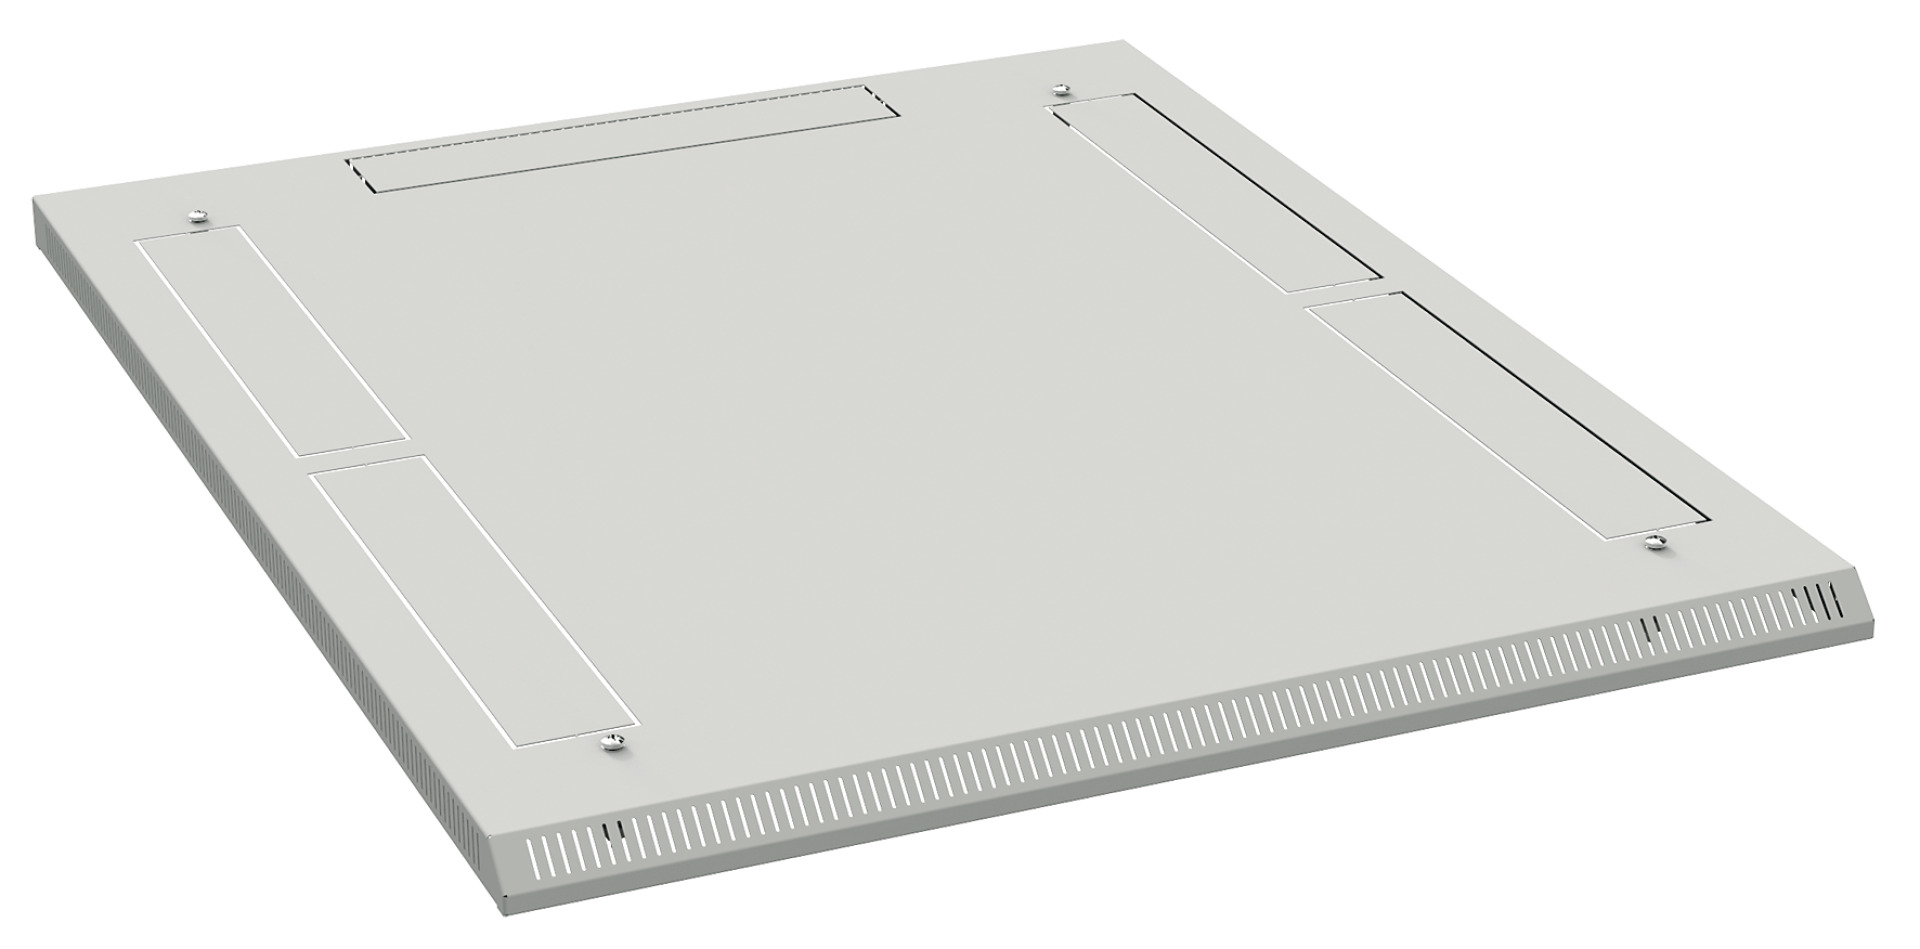 Additional Roof H=40 mm, 600x1000 mm, RAL9005, for Cabinet Series PRO